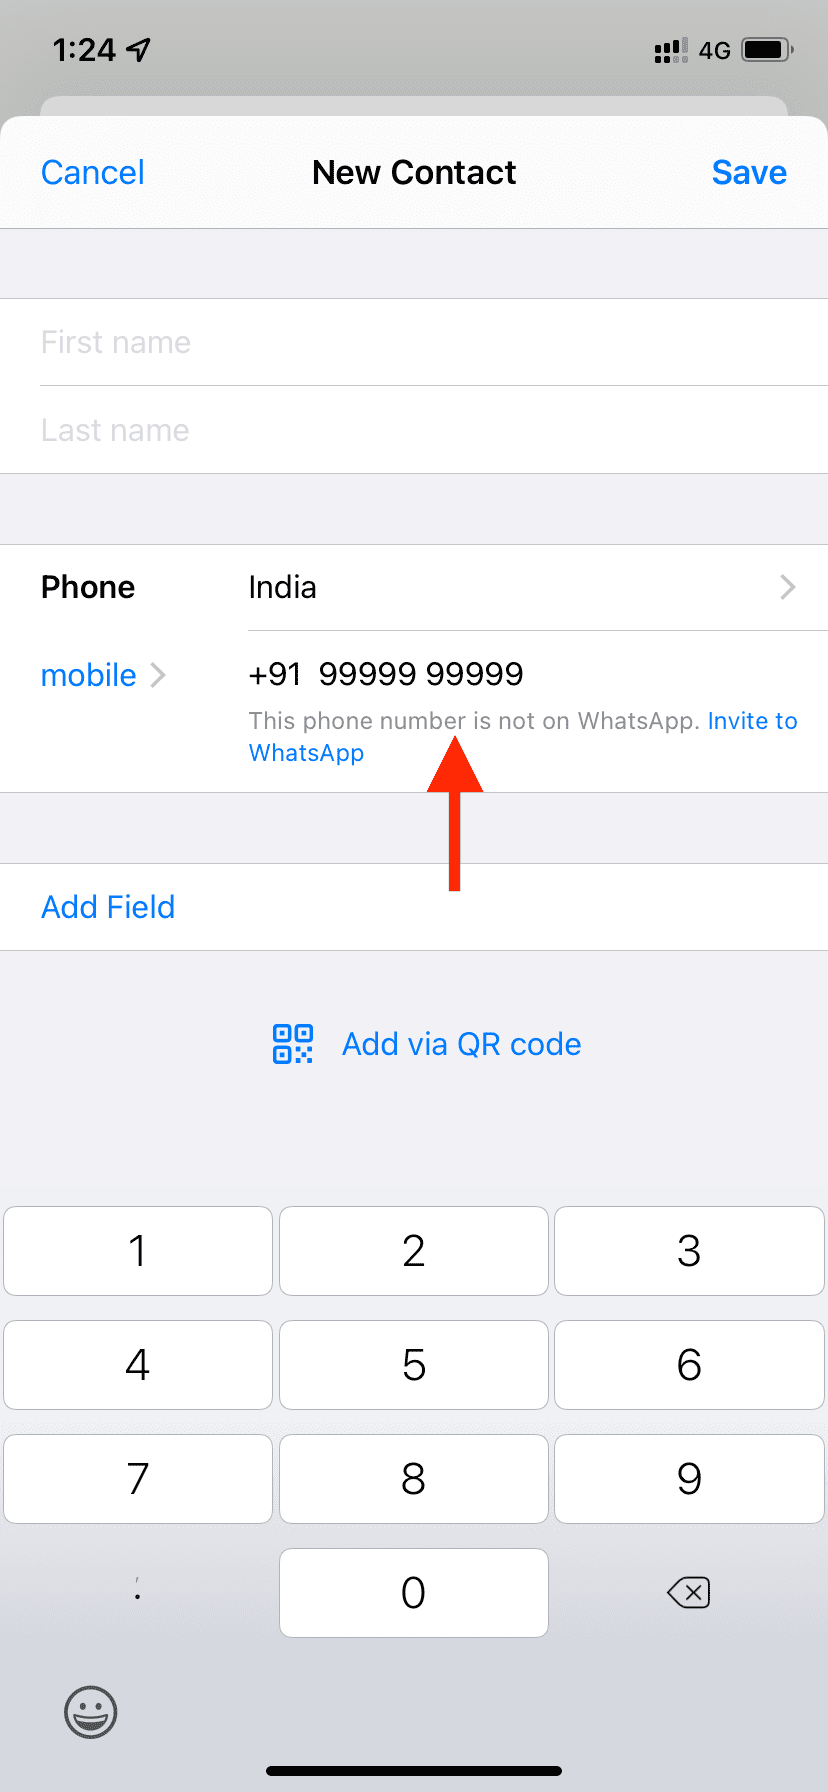 This phone number is not on WhatsApp